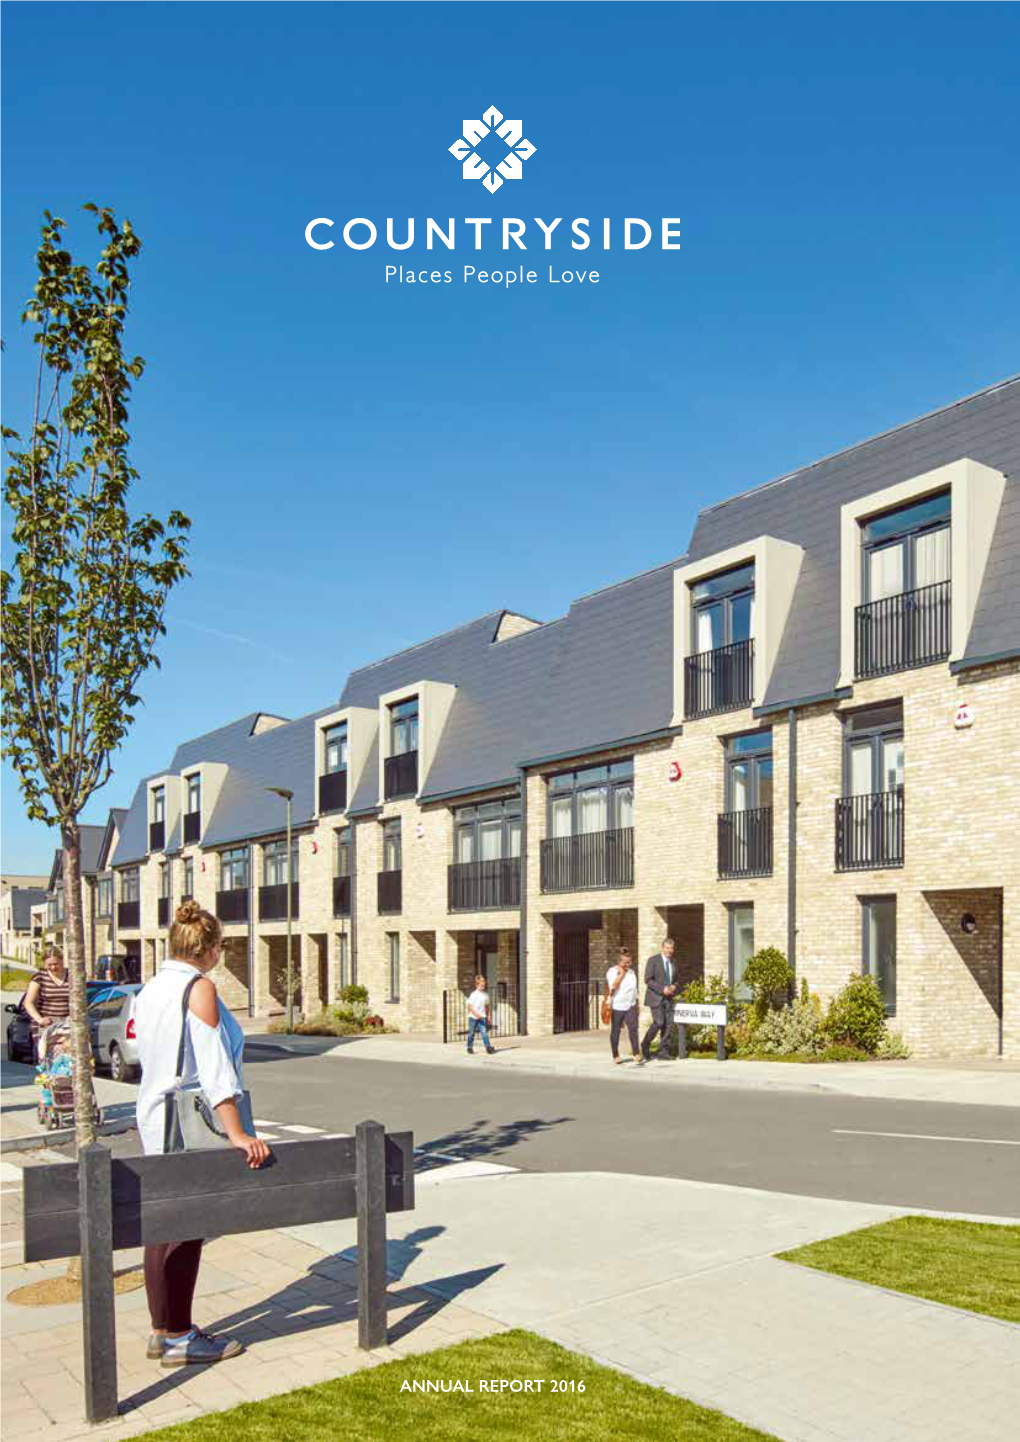 Countryside Properties Plc Annual Report 2016